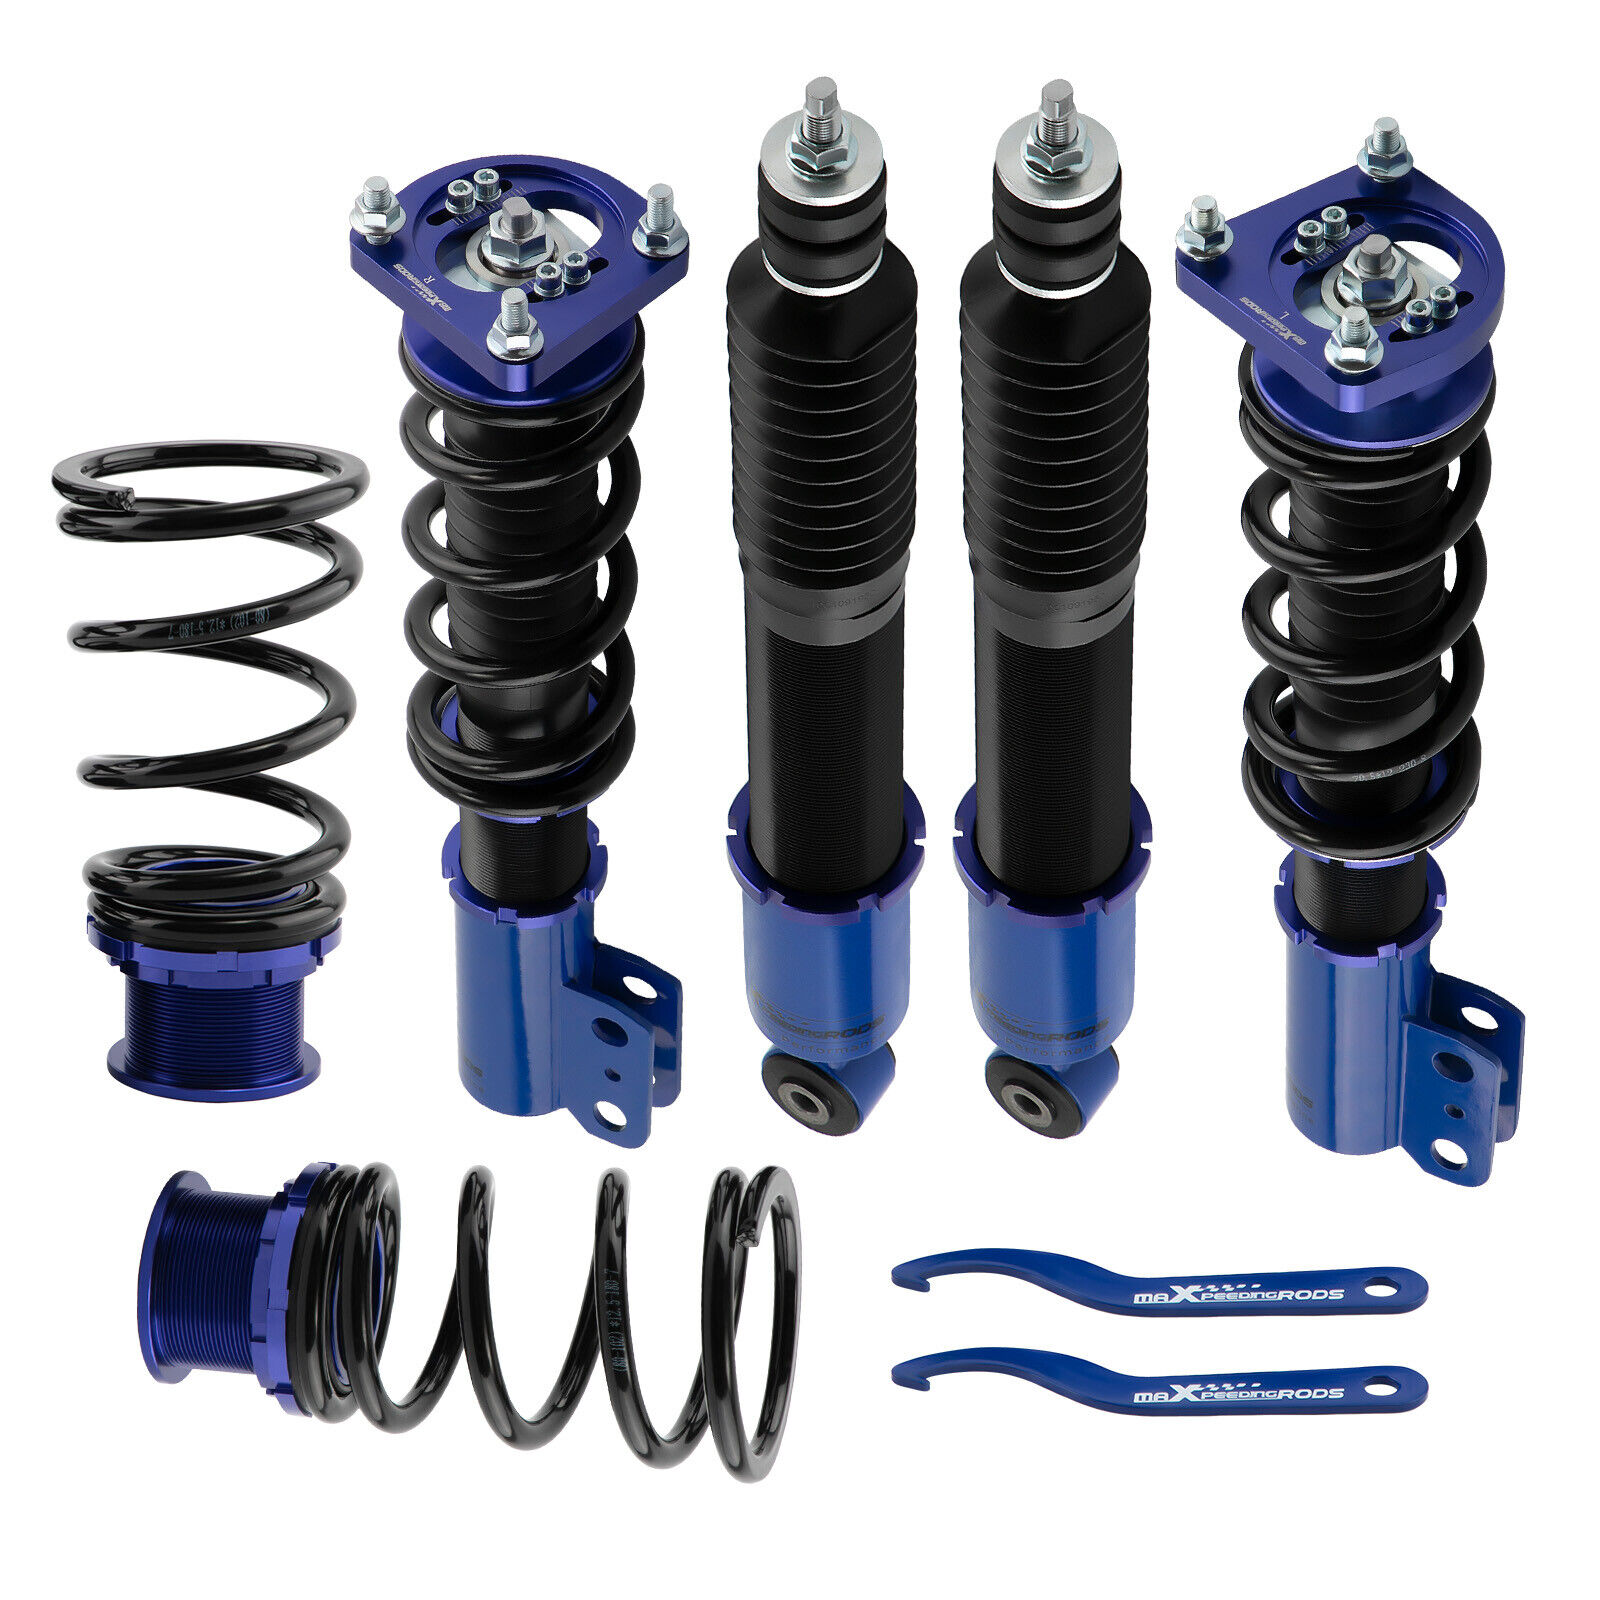 Coilovers Suspension Full Kit for Ford Mustang 94-04 Adjustable Height